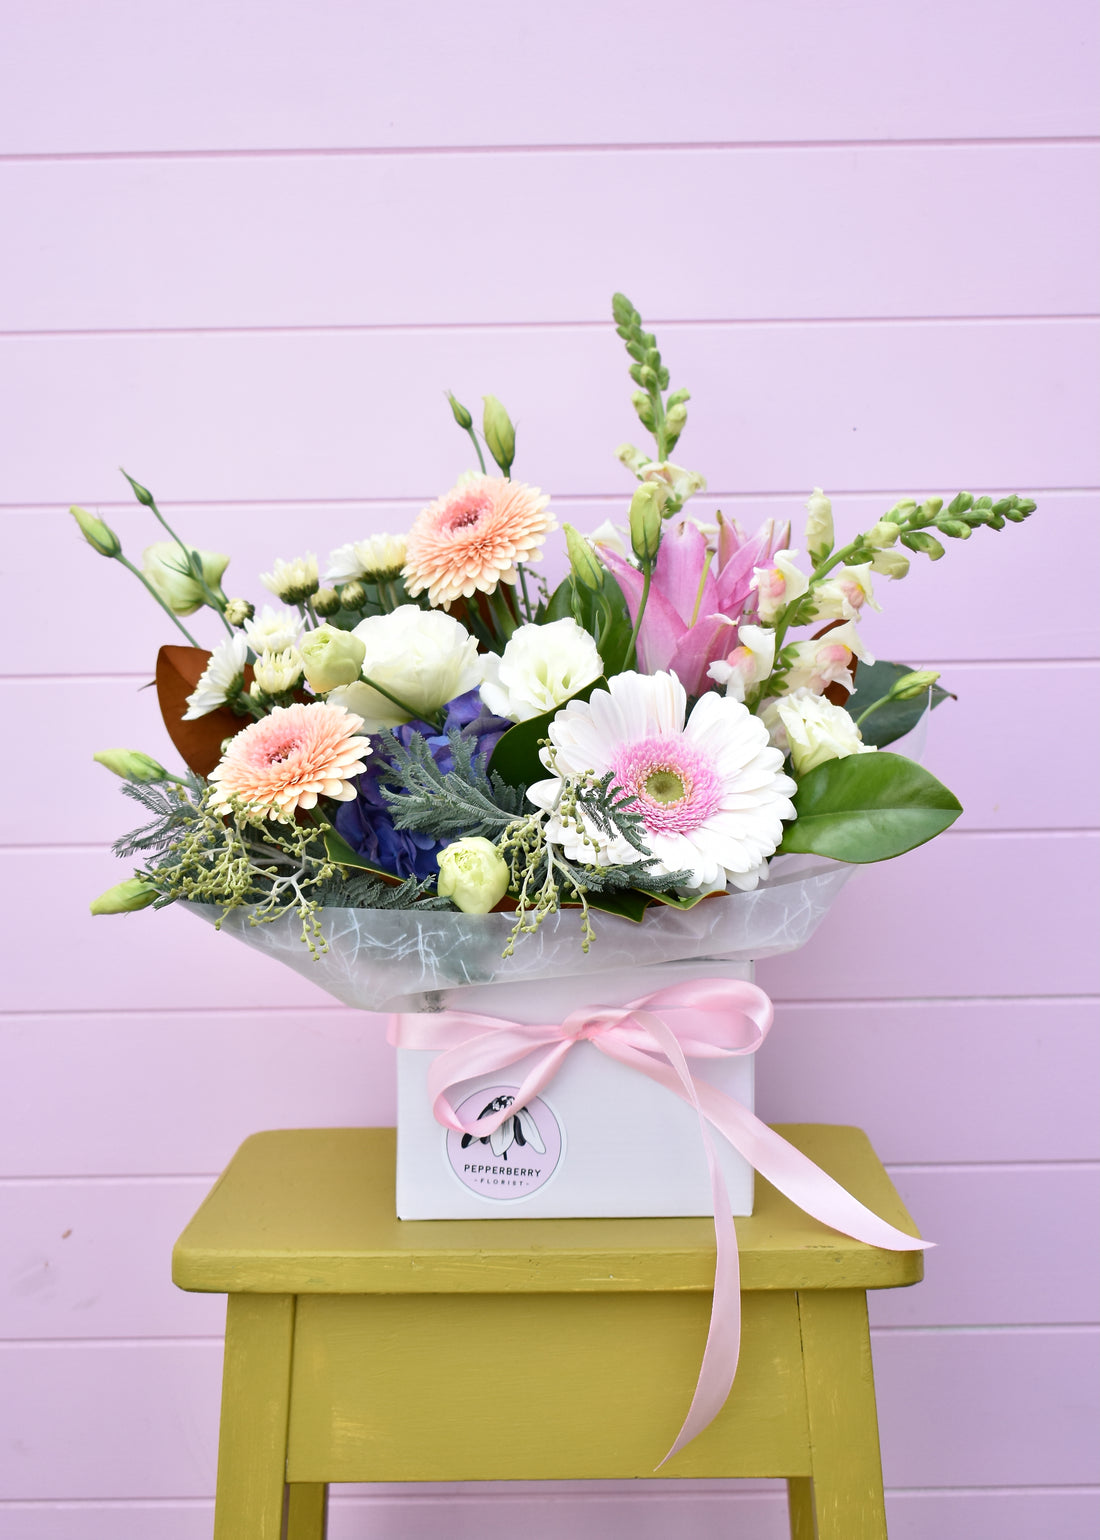 Pastel coloured fresh flowers in a white box. Roses, daisies, lillies in white, pink, peach